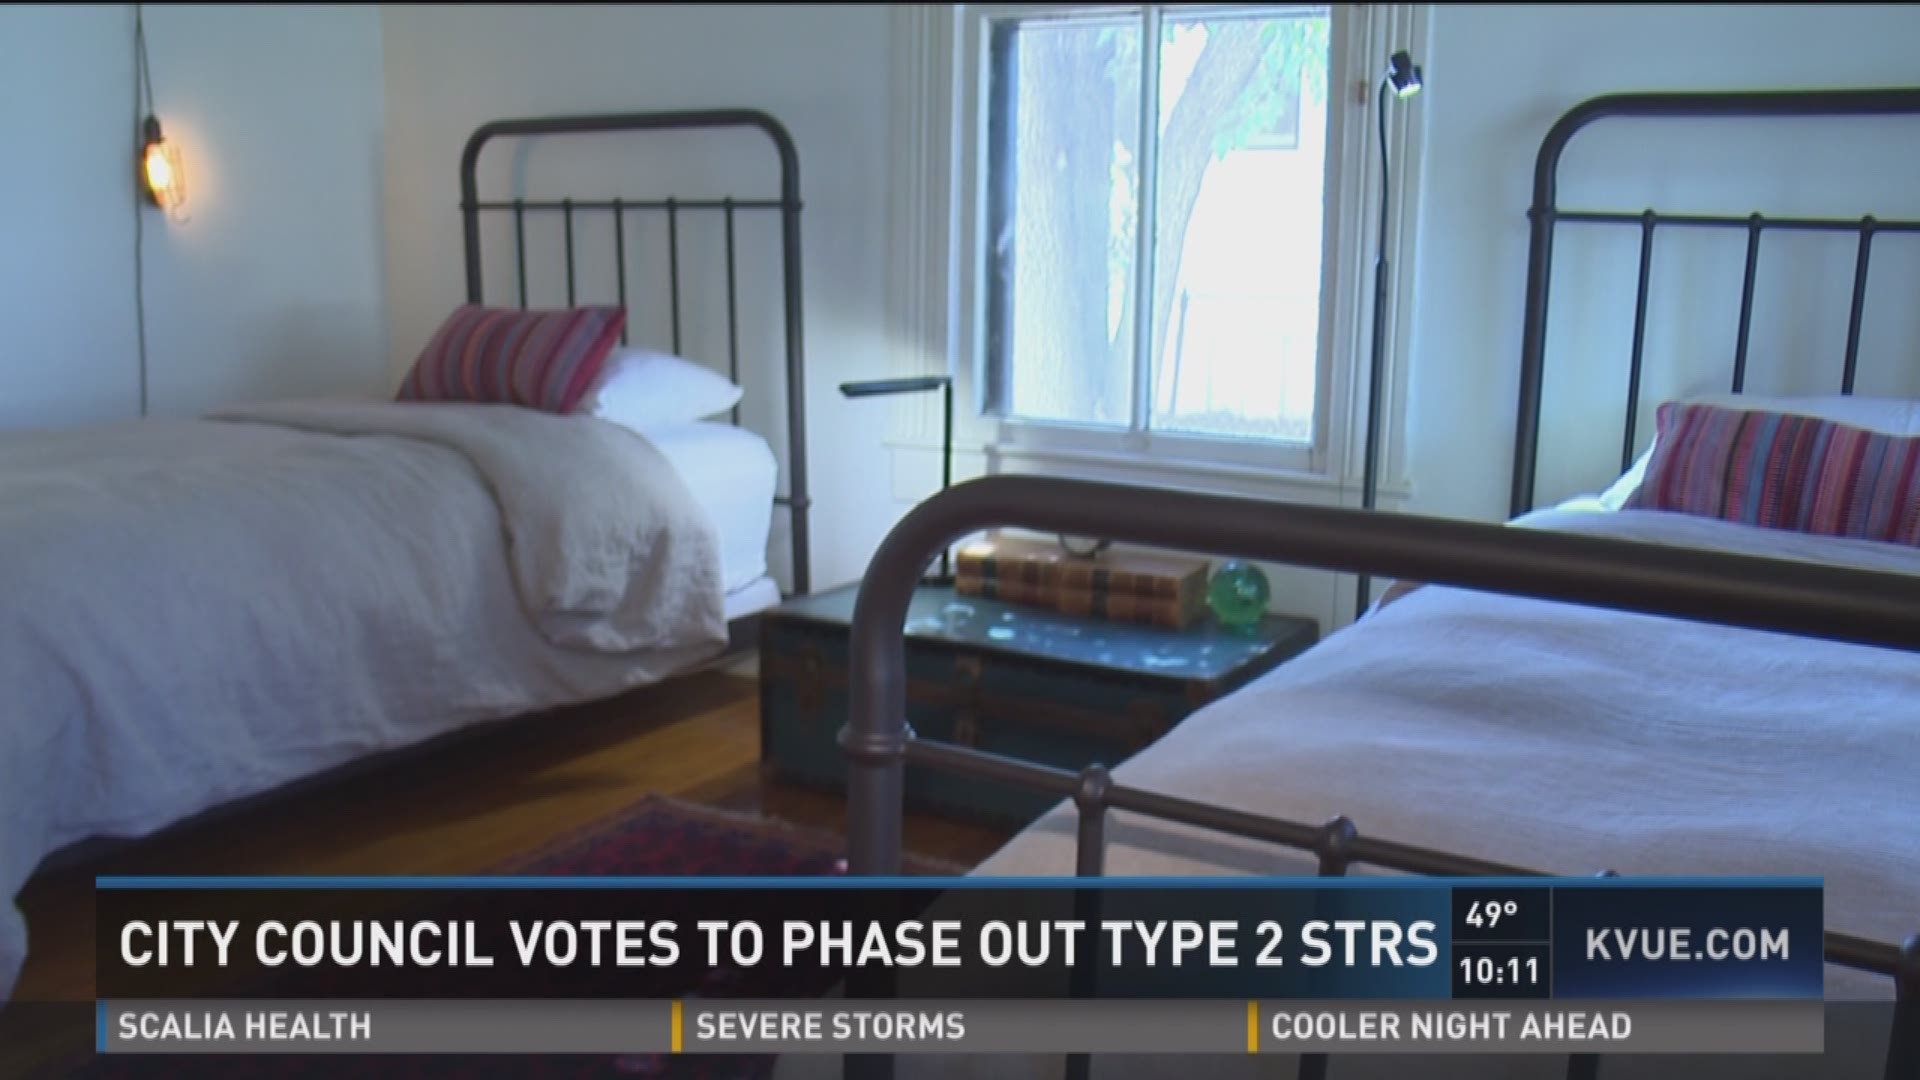 City council votes to phase out some STRs